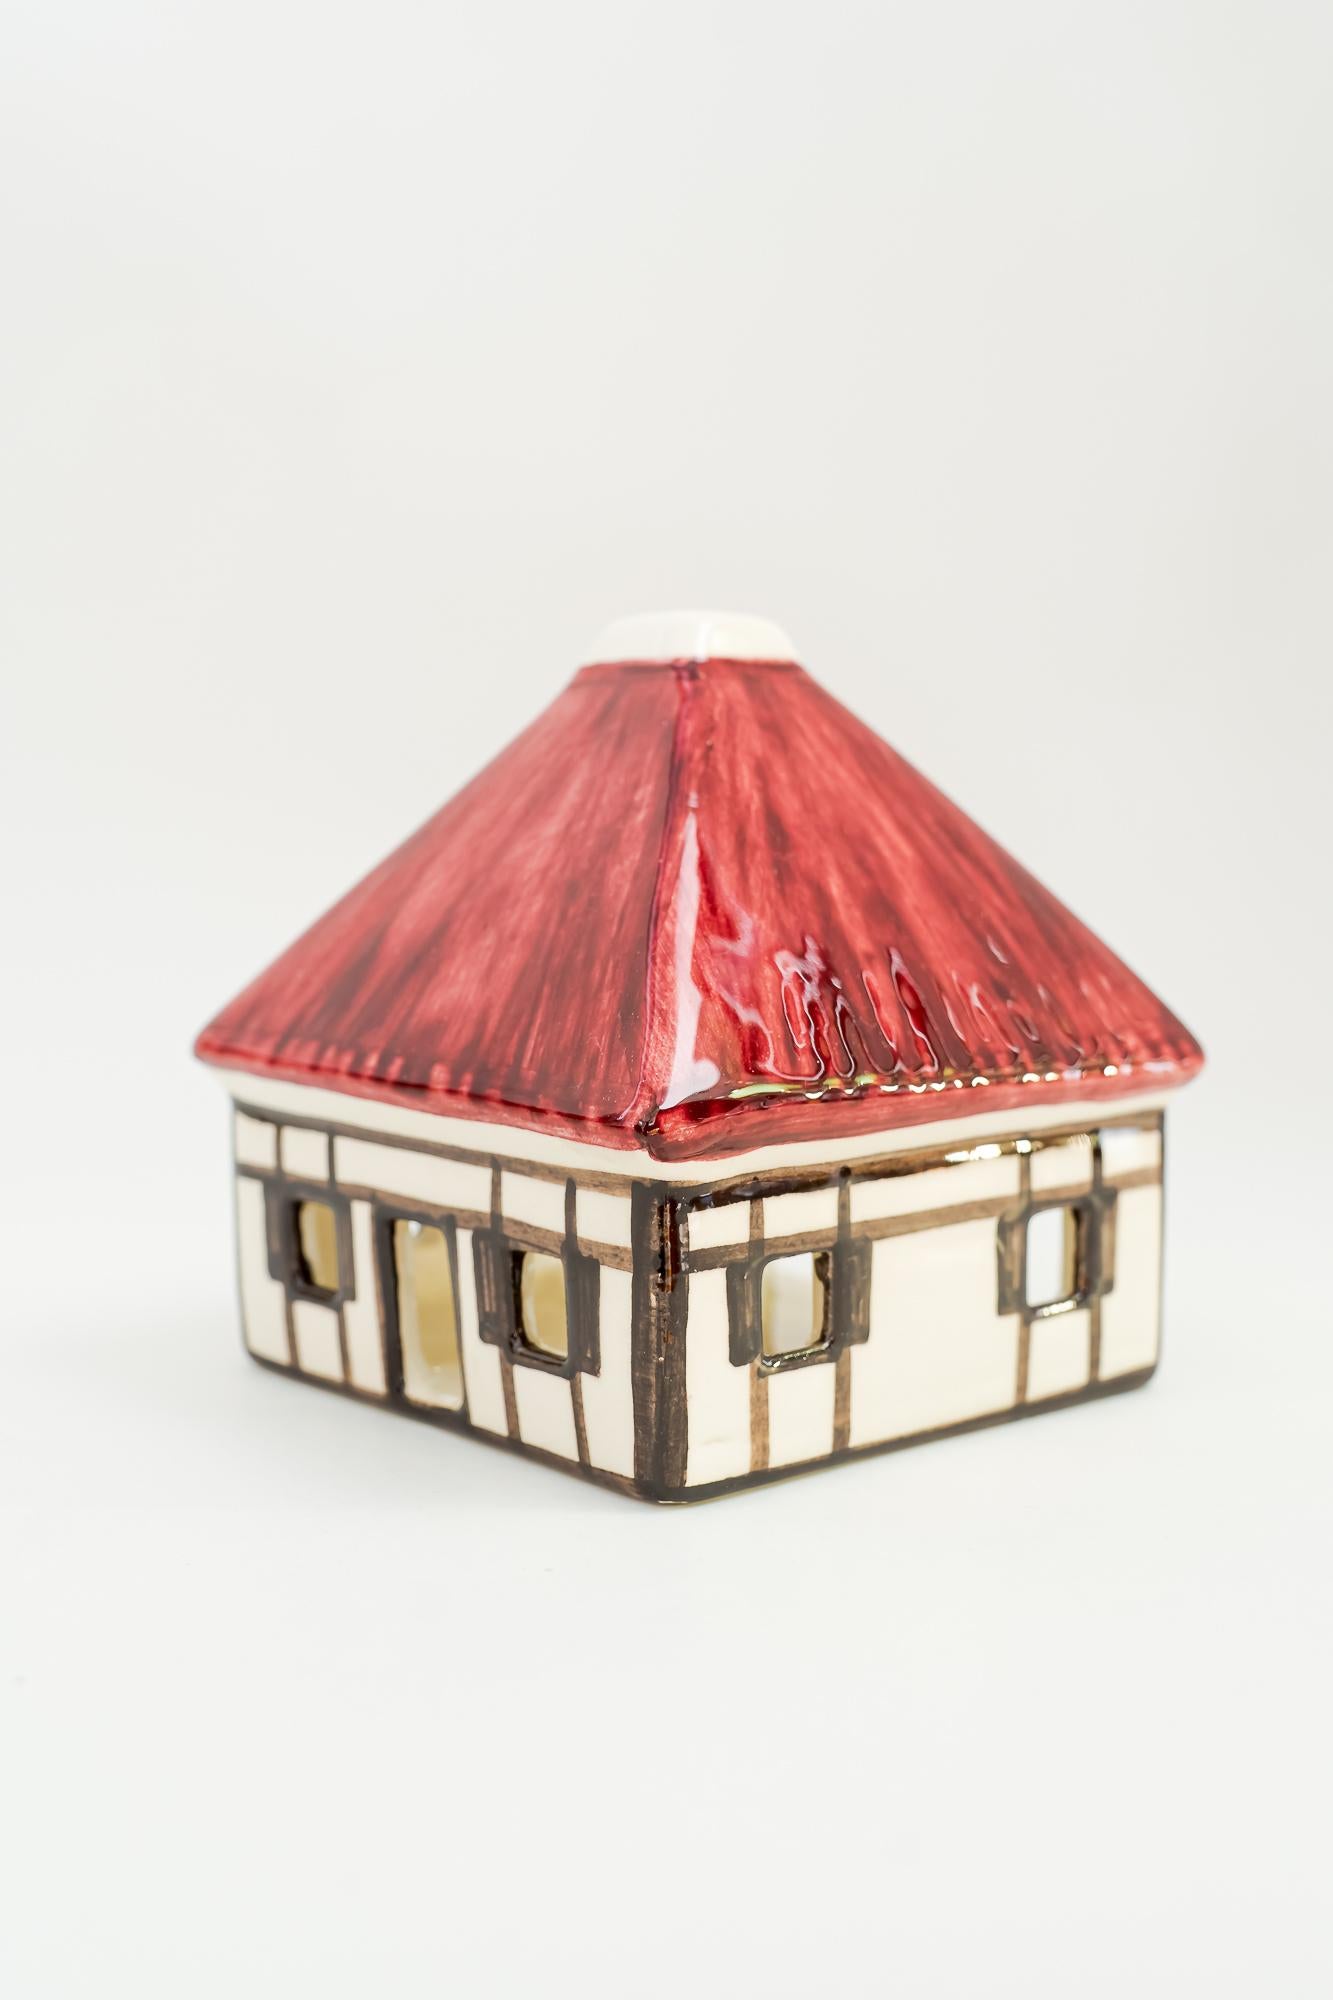 Christmas Ceramic Houses for Candle Light Deco in Shape of a Village Around 1970 For Sale 4